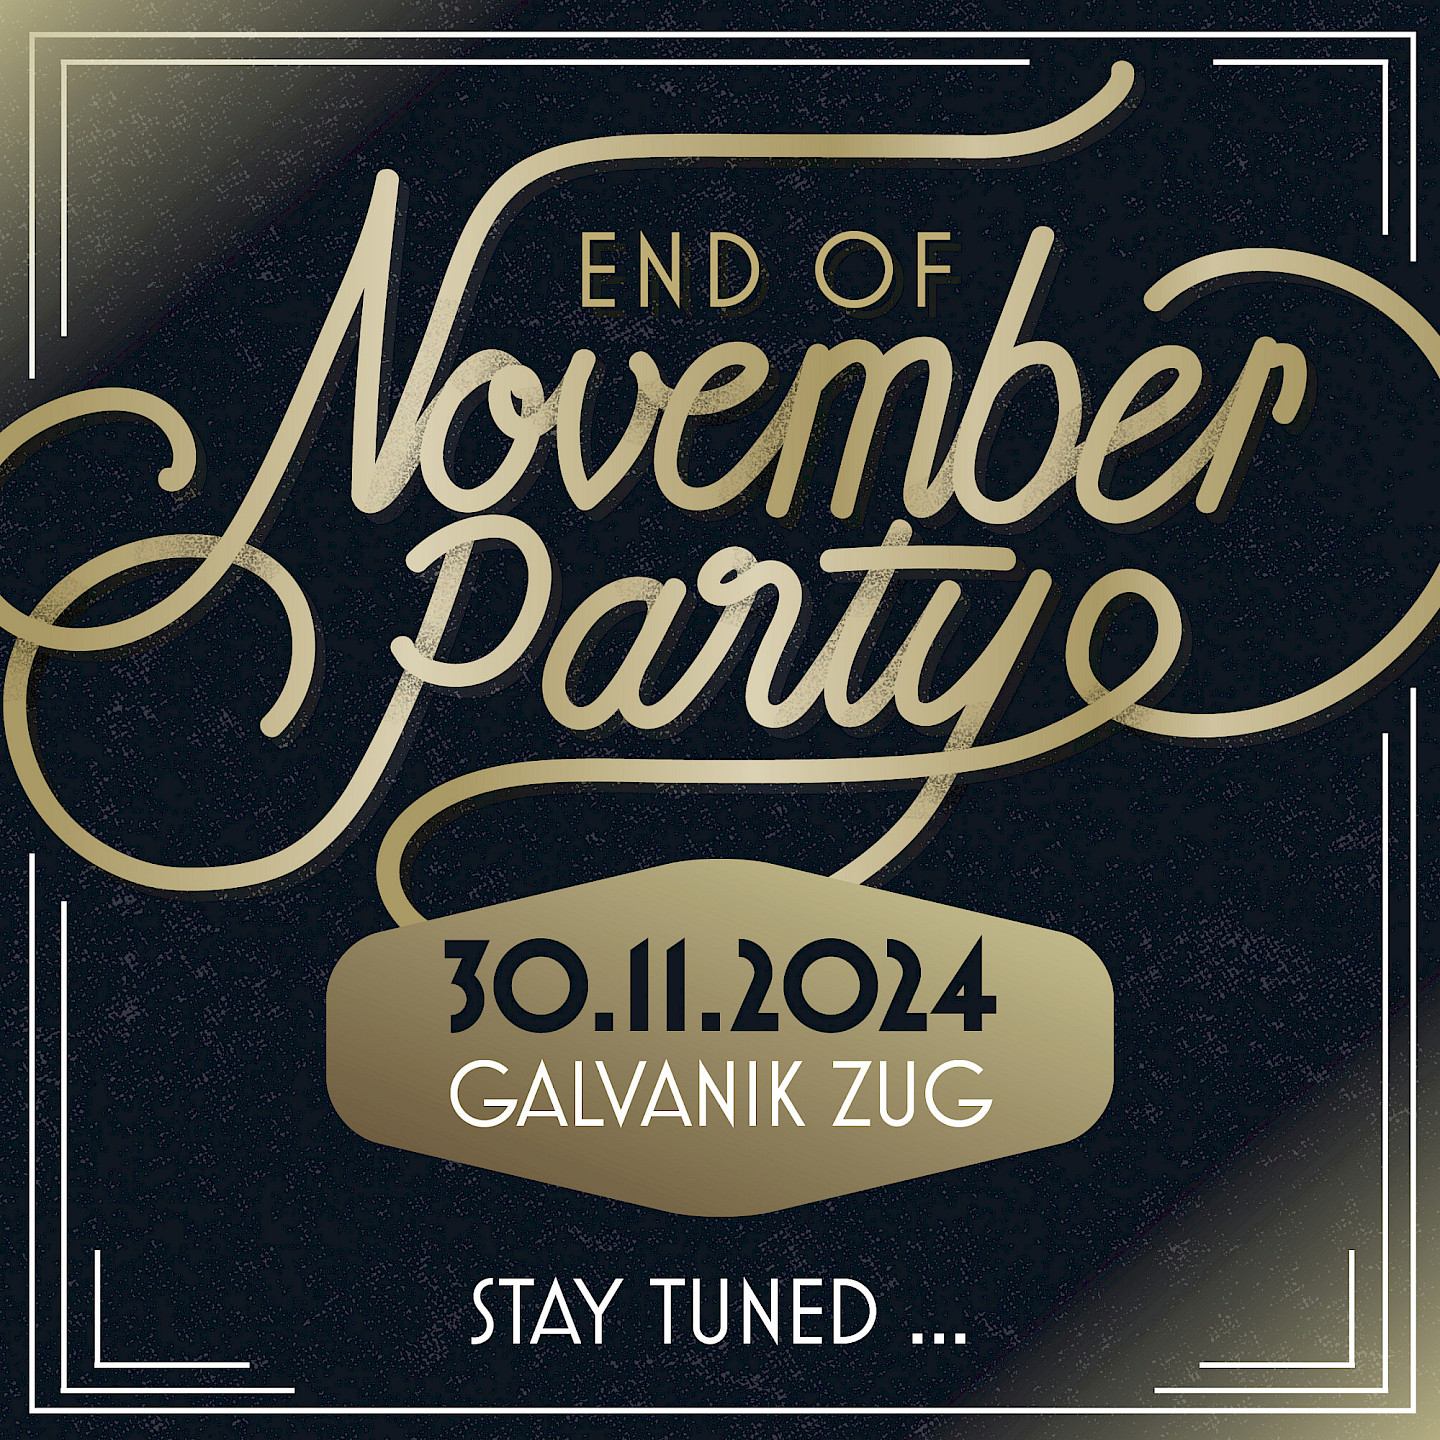 End of November Party 2024